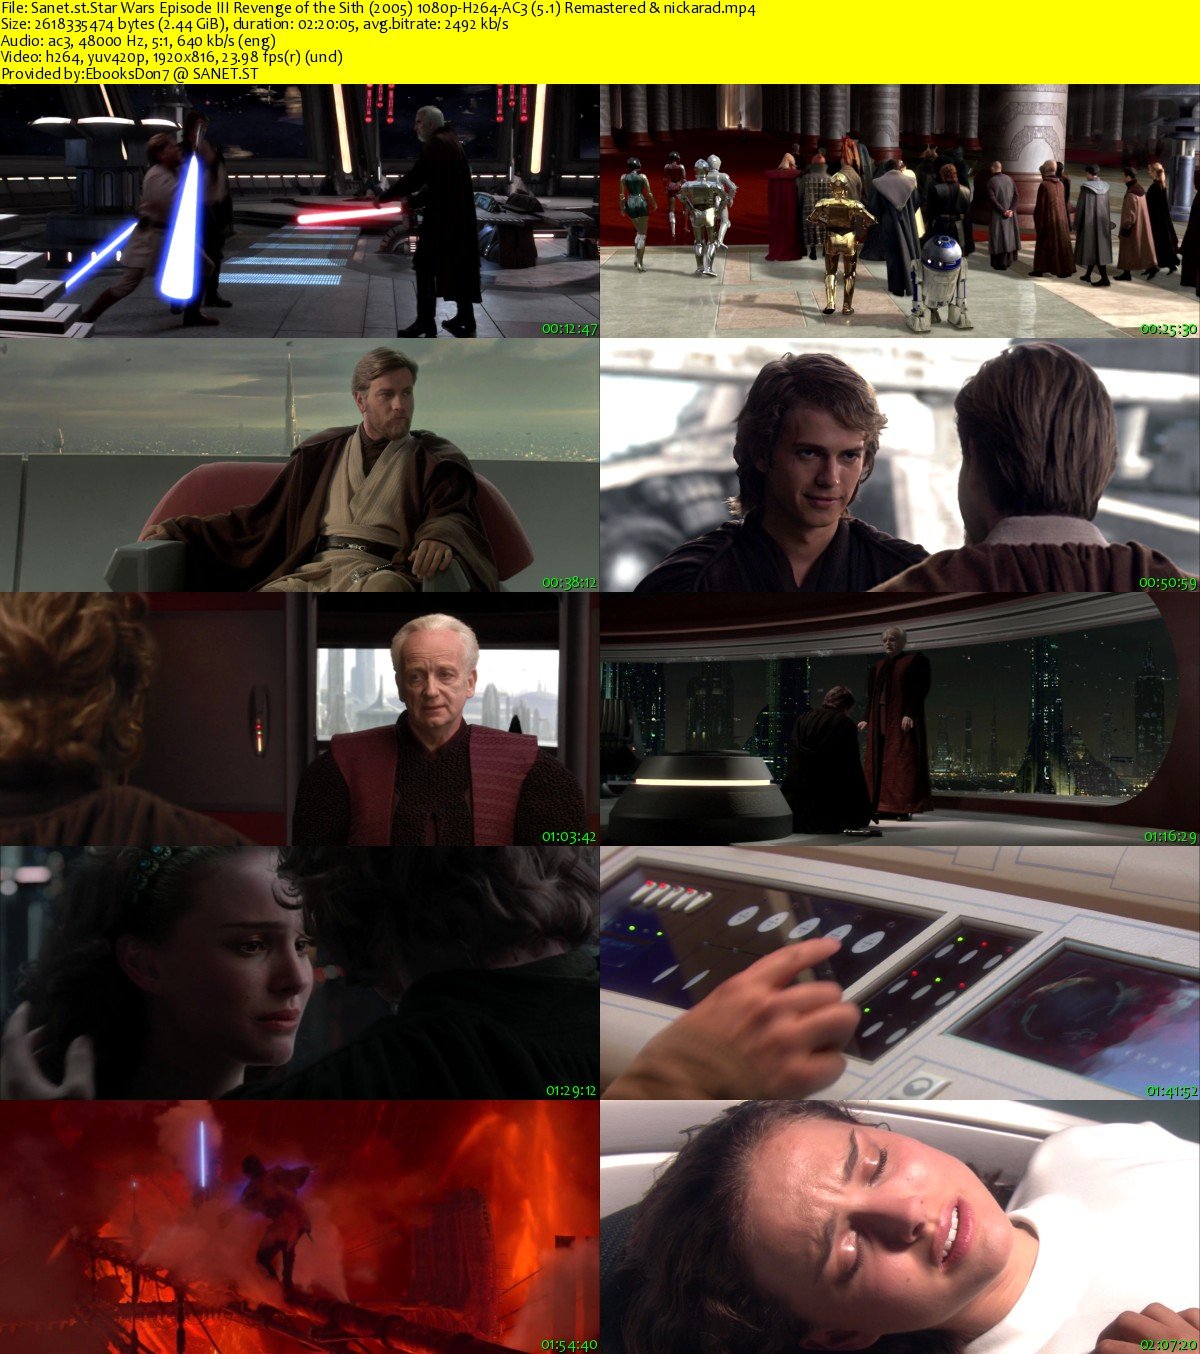 Star Wars Ep. III: Revenge of the Sith download the new